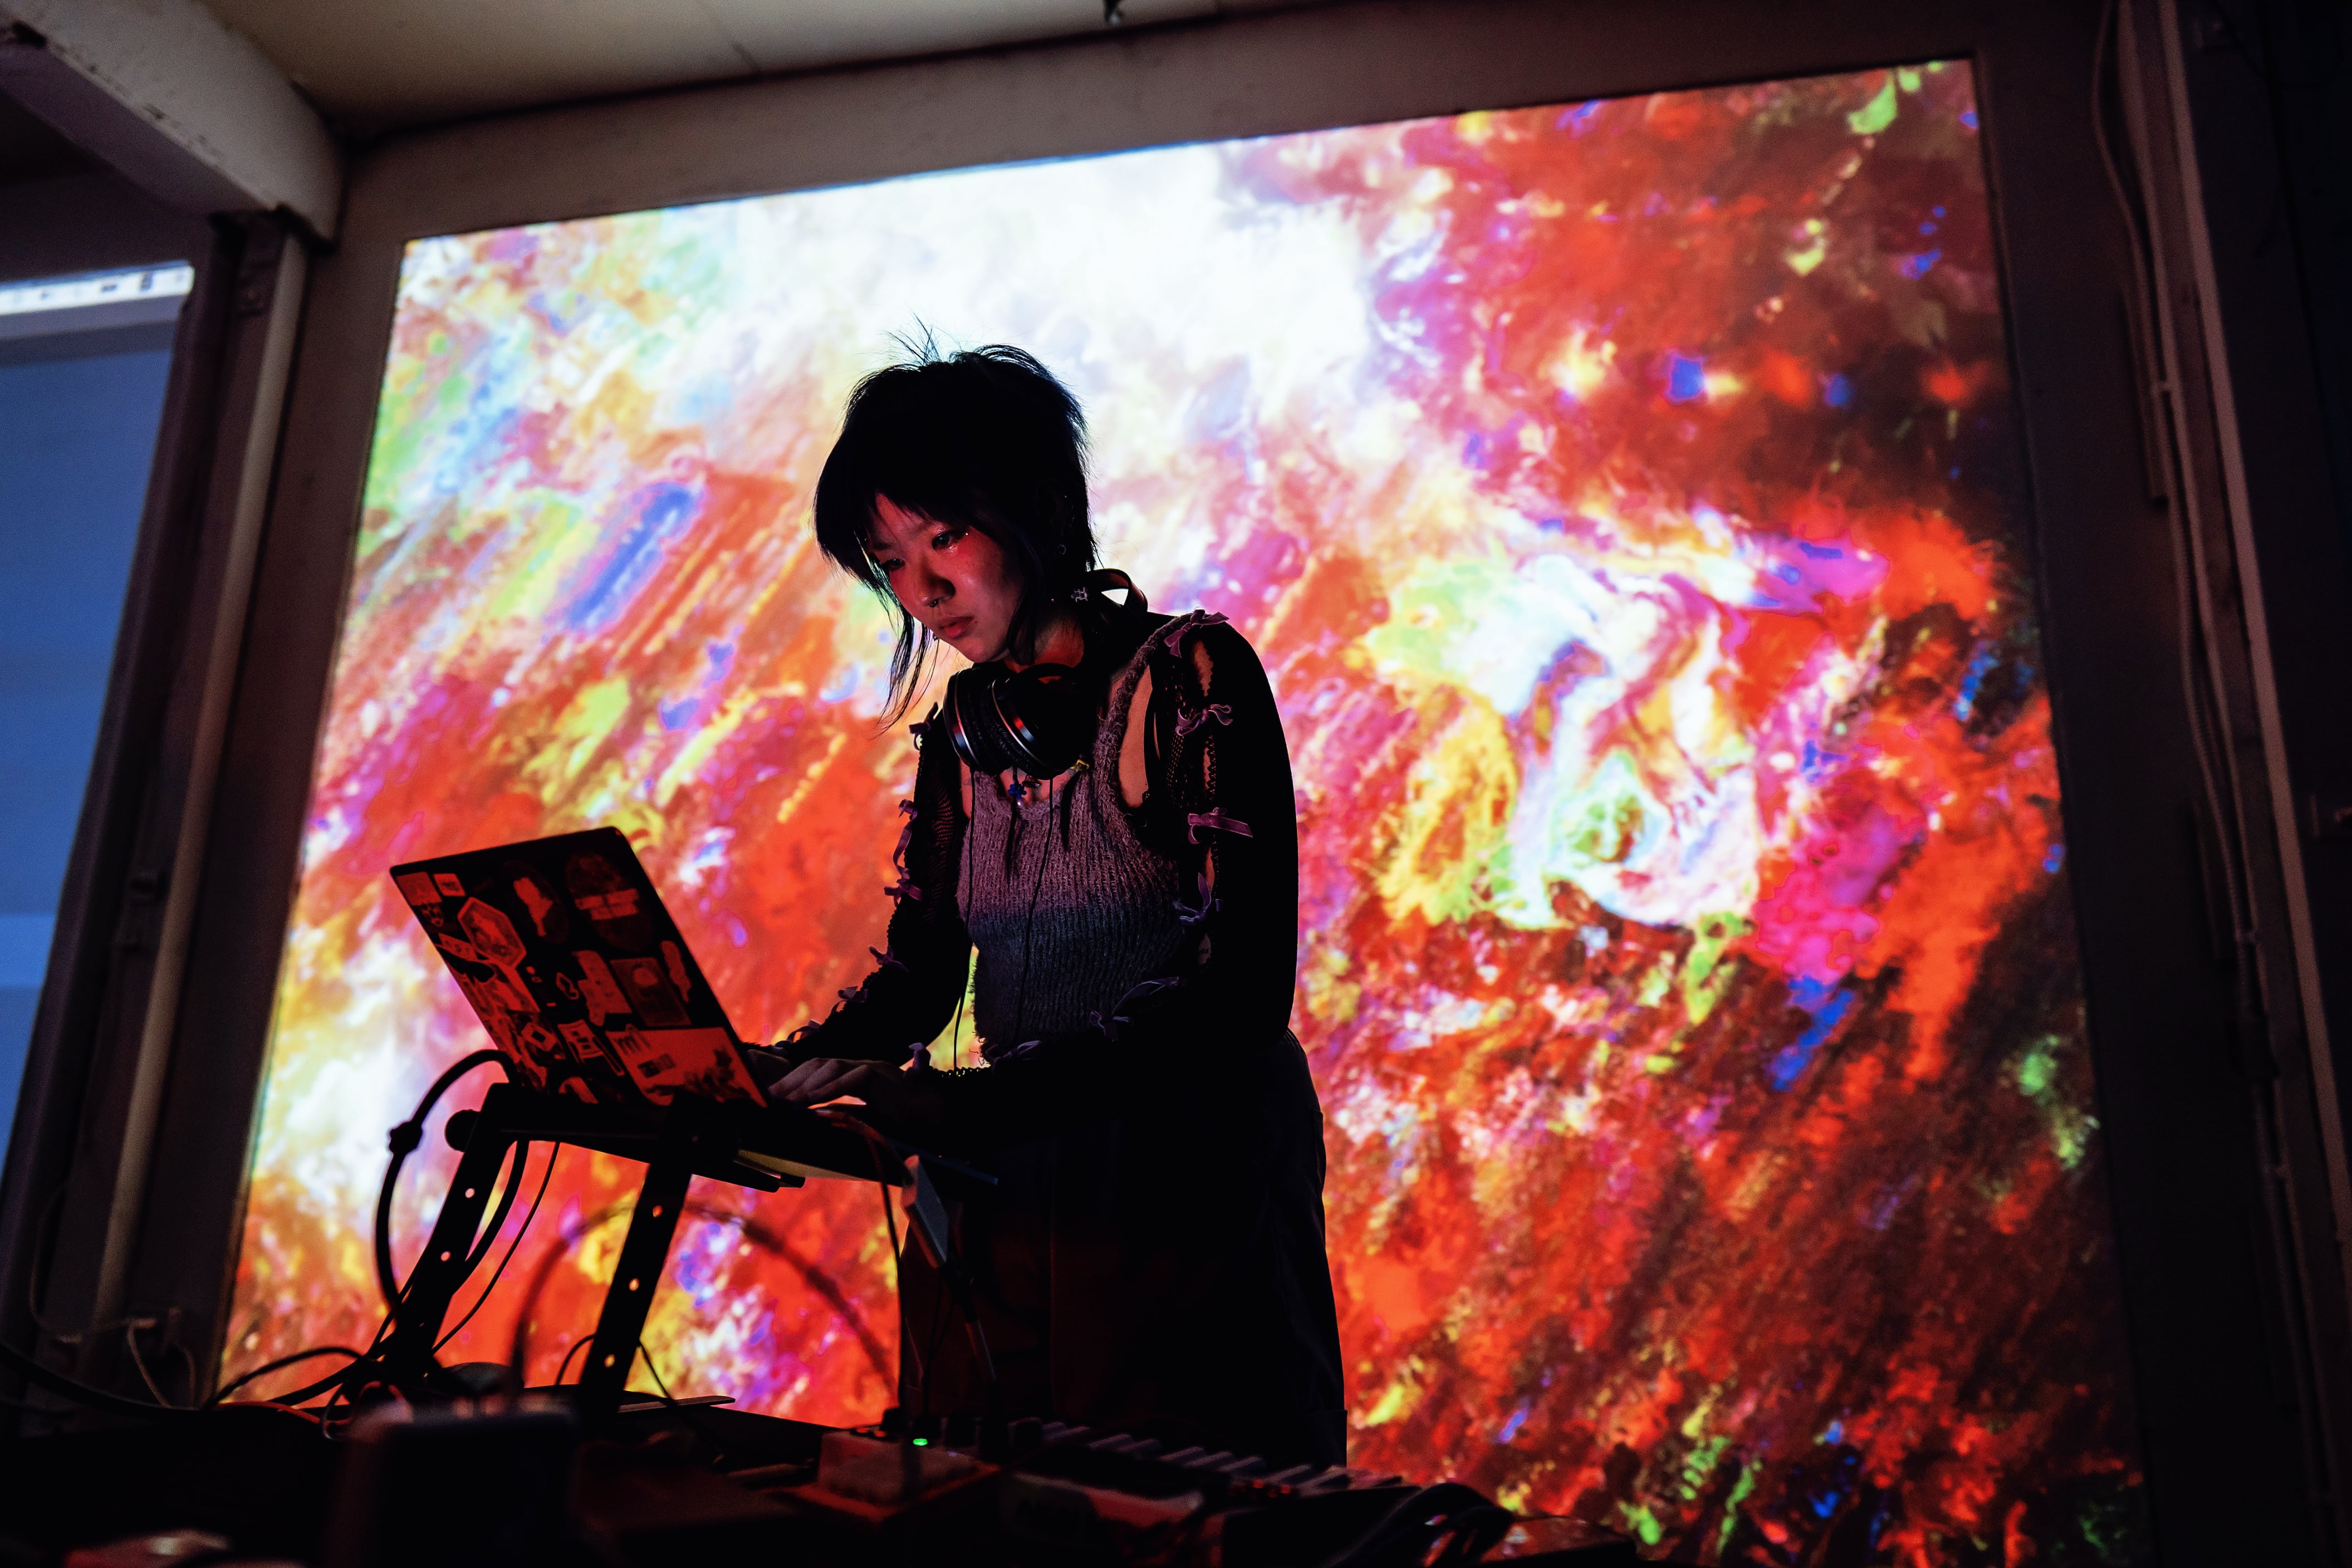 a photo of viola, looking down into a computer, with red projection graphics in the background